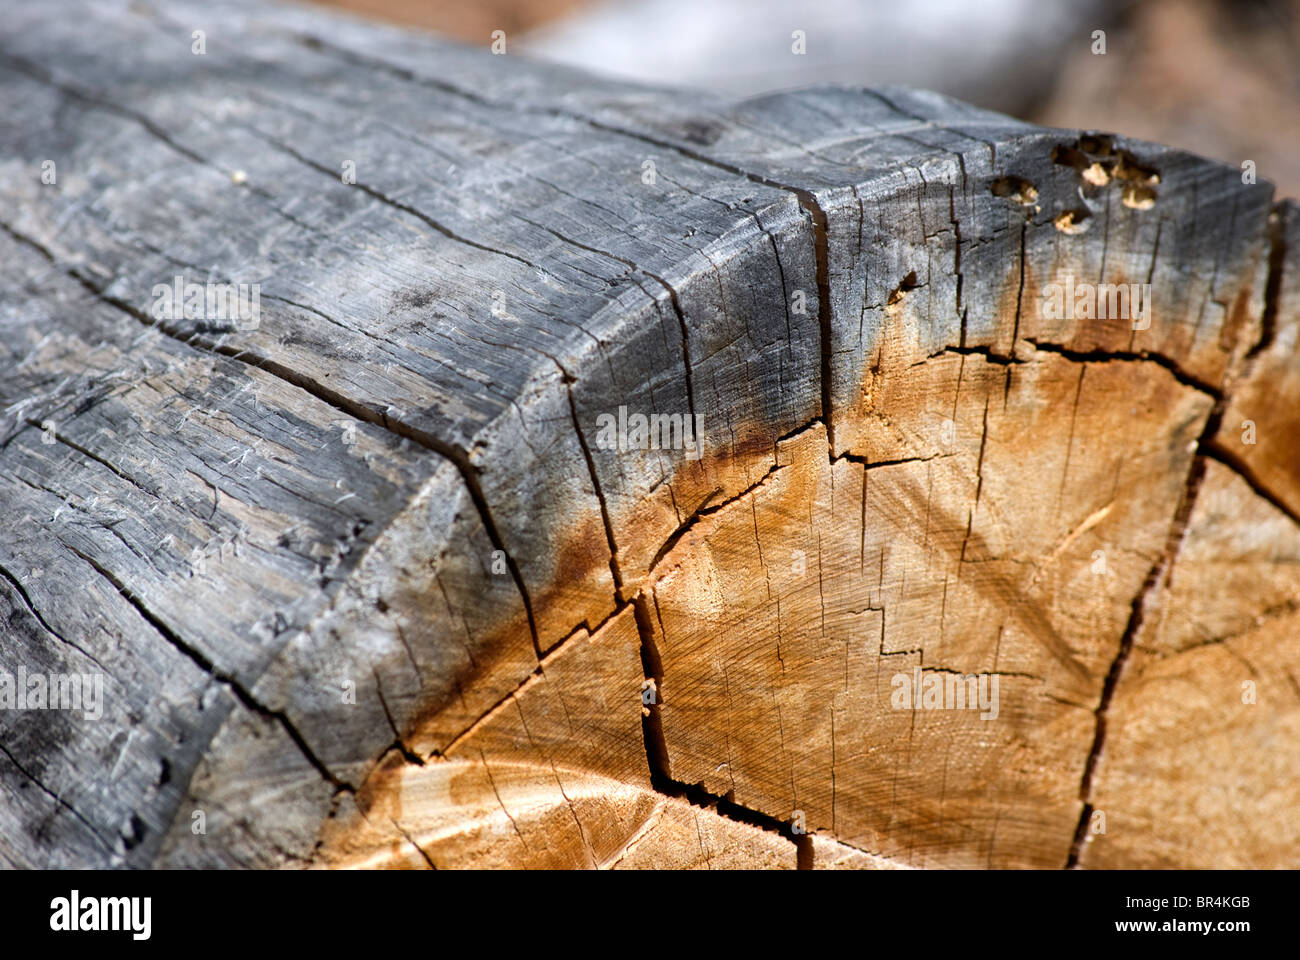 A Southwestern Ponderosa Pine (Pinus brachyptera) log with visible fading, cracking, and tree rings. Stock Photo